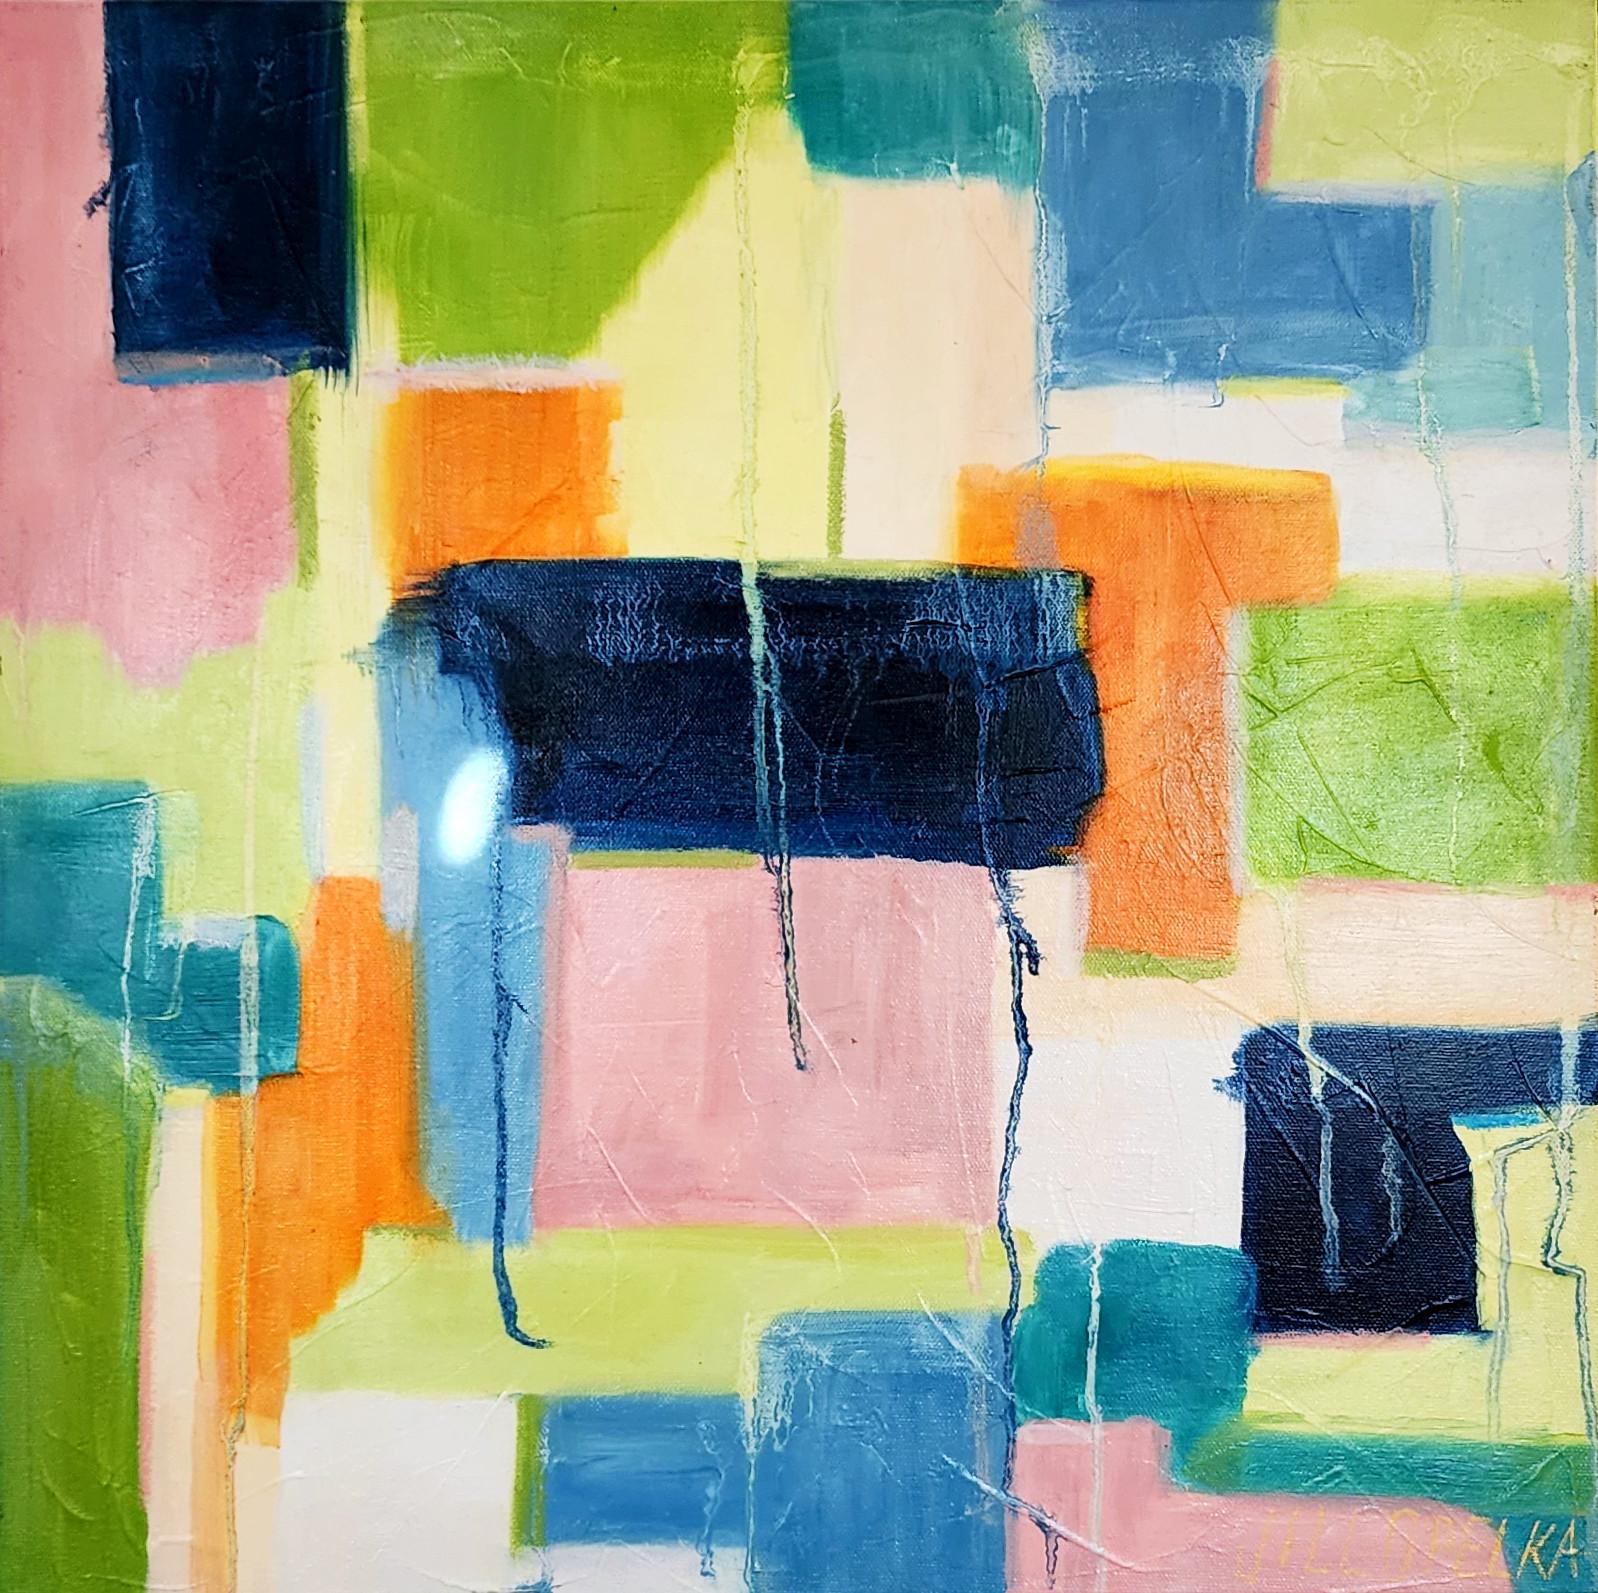 Abstract III (Abstract, Vibrant, Deep, Blue, Navy, Green, Orange, 30% OFF) - Painting by Jill Opelka